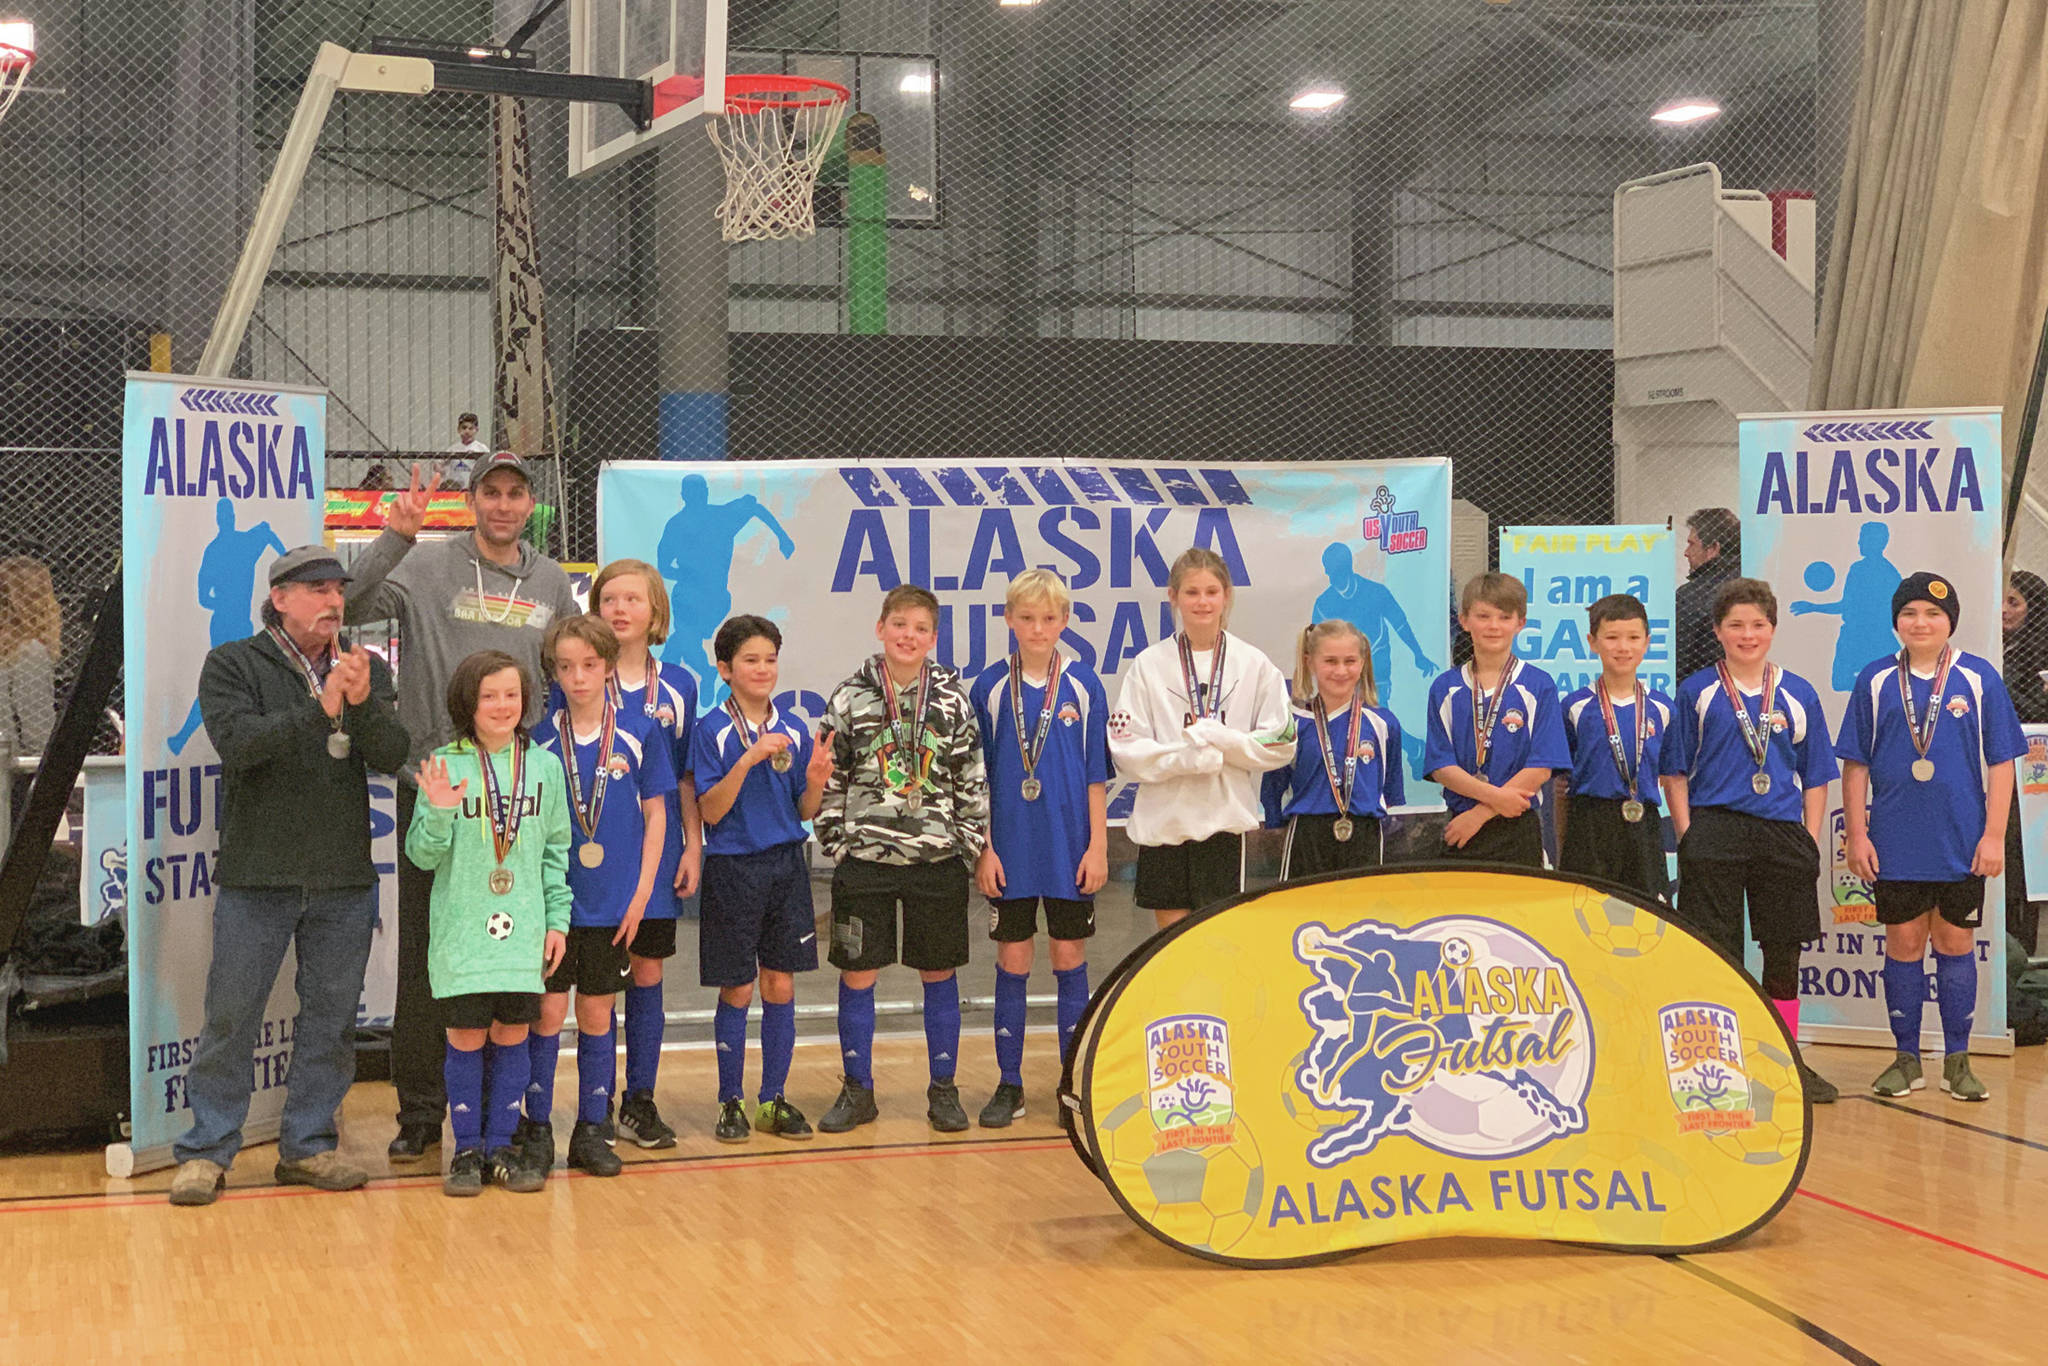 Members of the Defenders, an under 12 boys/girls team with the Soccer Association of Homer, celebrate winning second place at the 2019 Alaska Youth Soccer Futsal State Cup in Anchorage, Alaska. (Photo courtesy Breanna Hill)